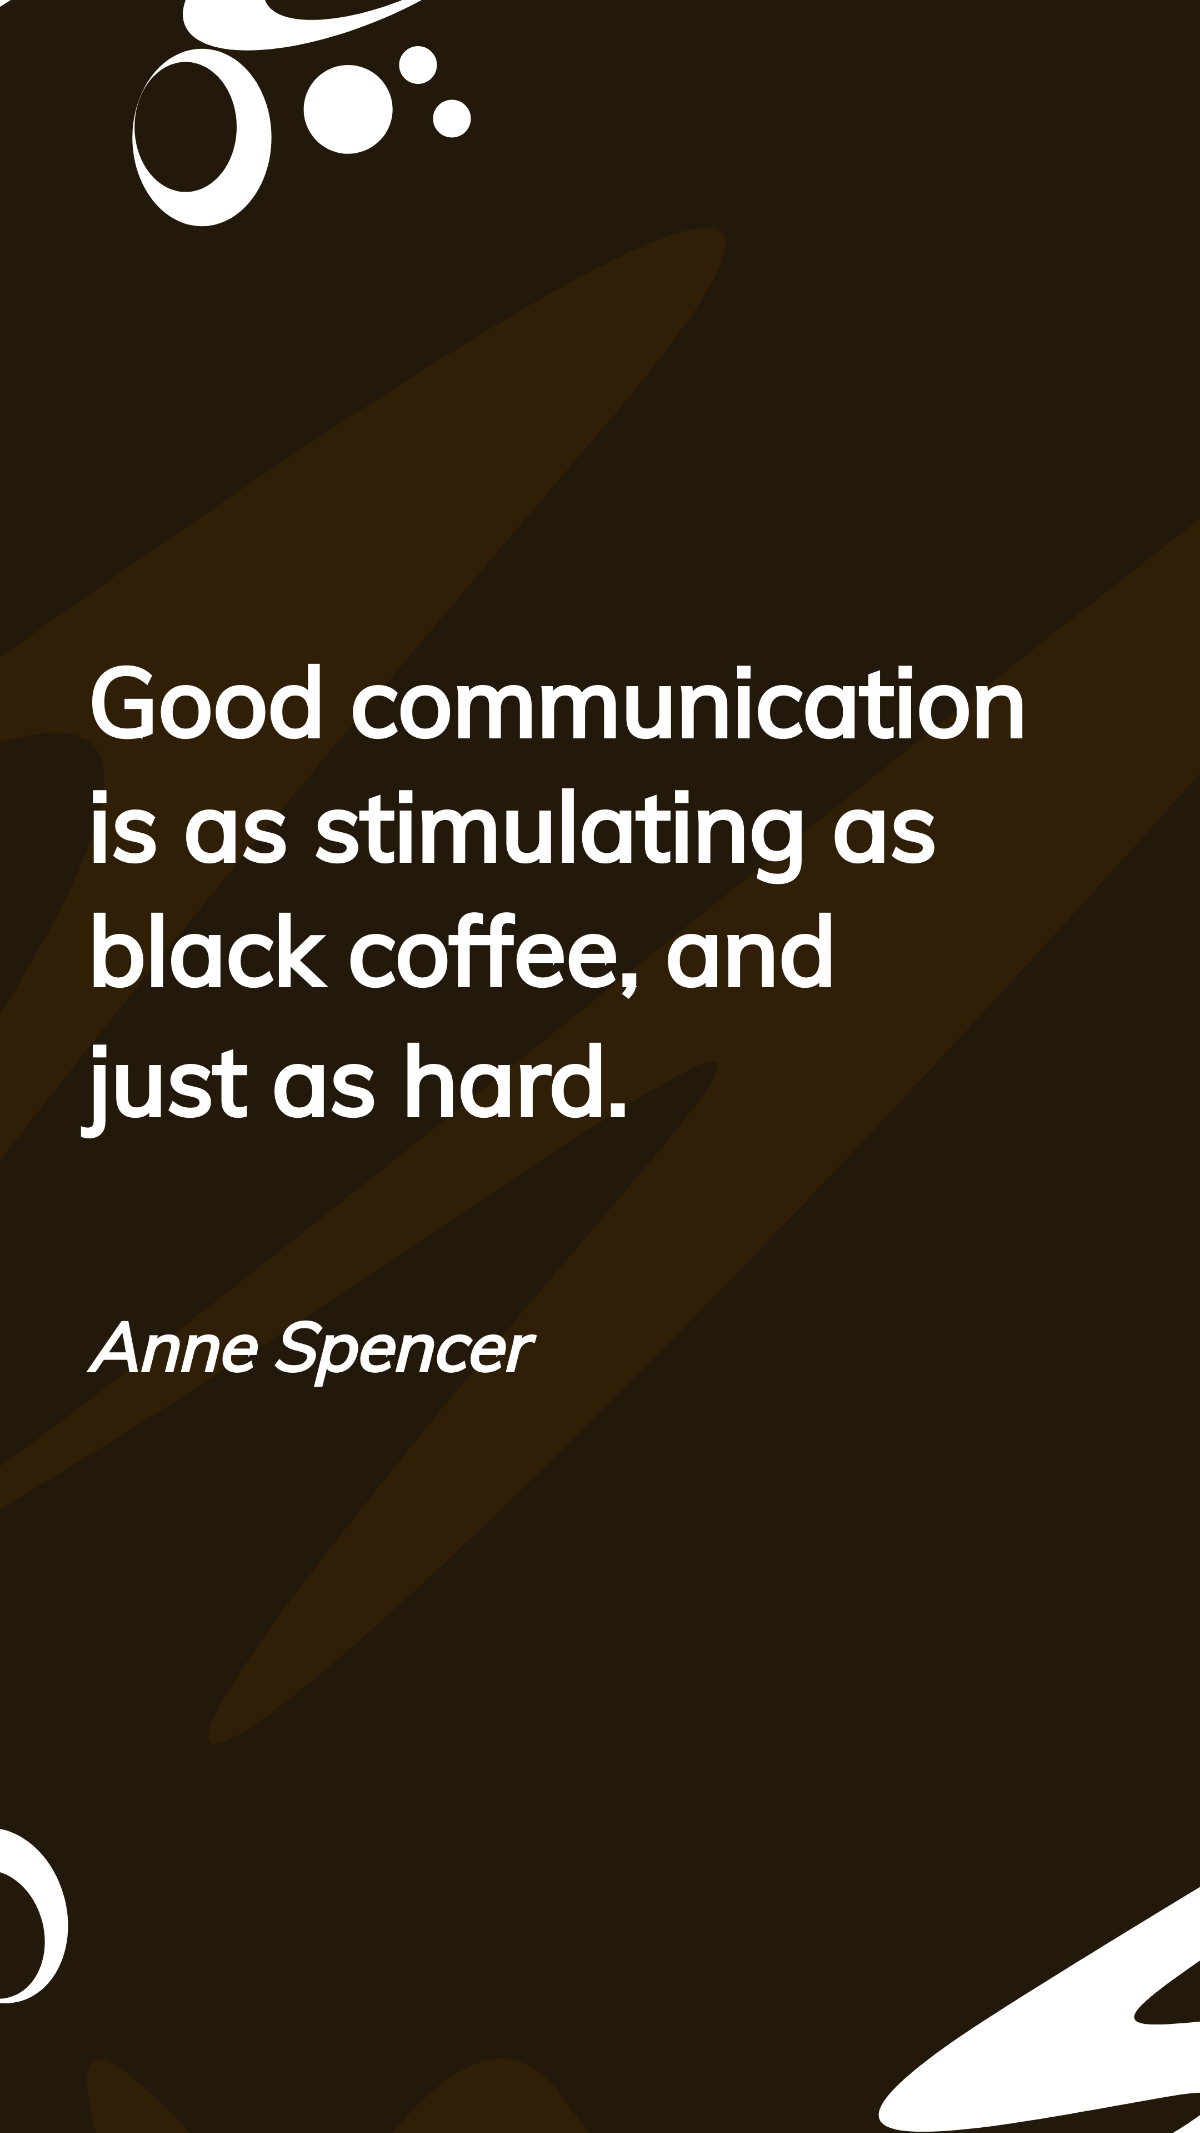 Anne Spencer - Good communication is as stimulating as black coffee, and just as hard.